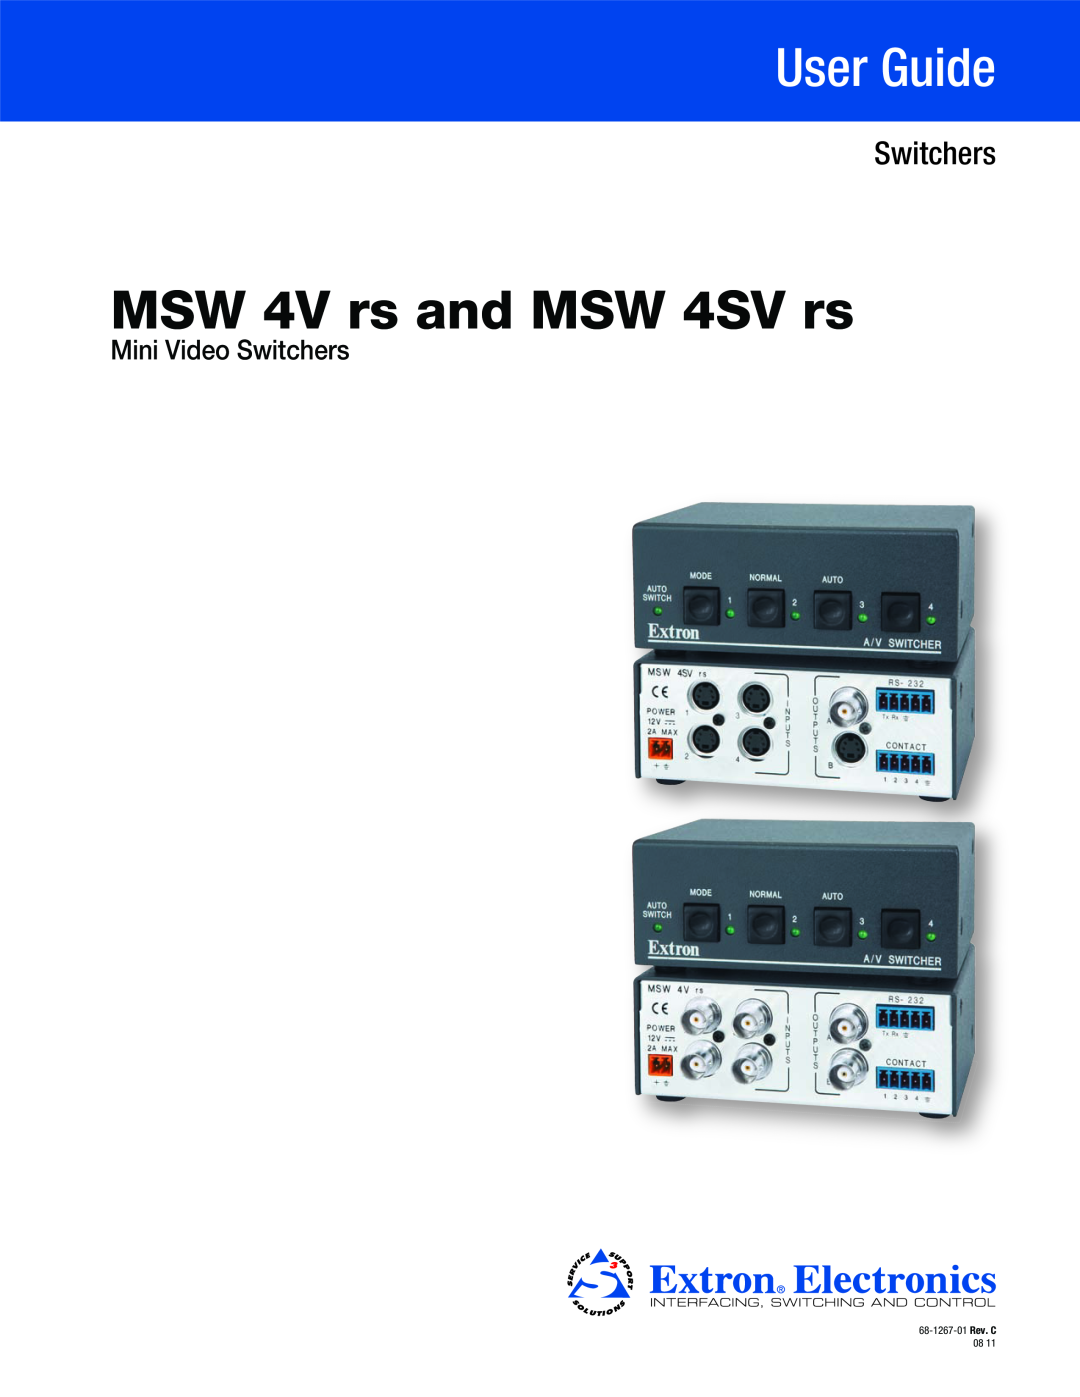 Extron electronic MSW 4SV RS manual MSW 4V rs and MSW 4SV rs, User Guide, Mini Video Switchers, 68-1267-01 Rev. C 